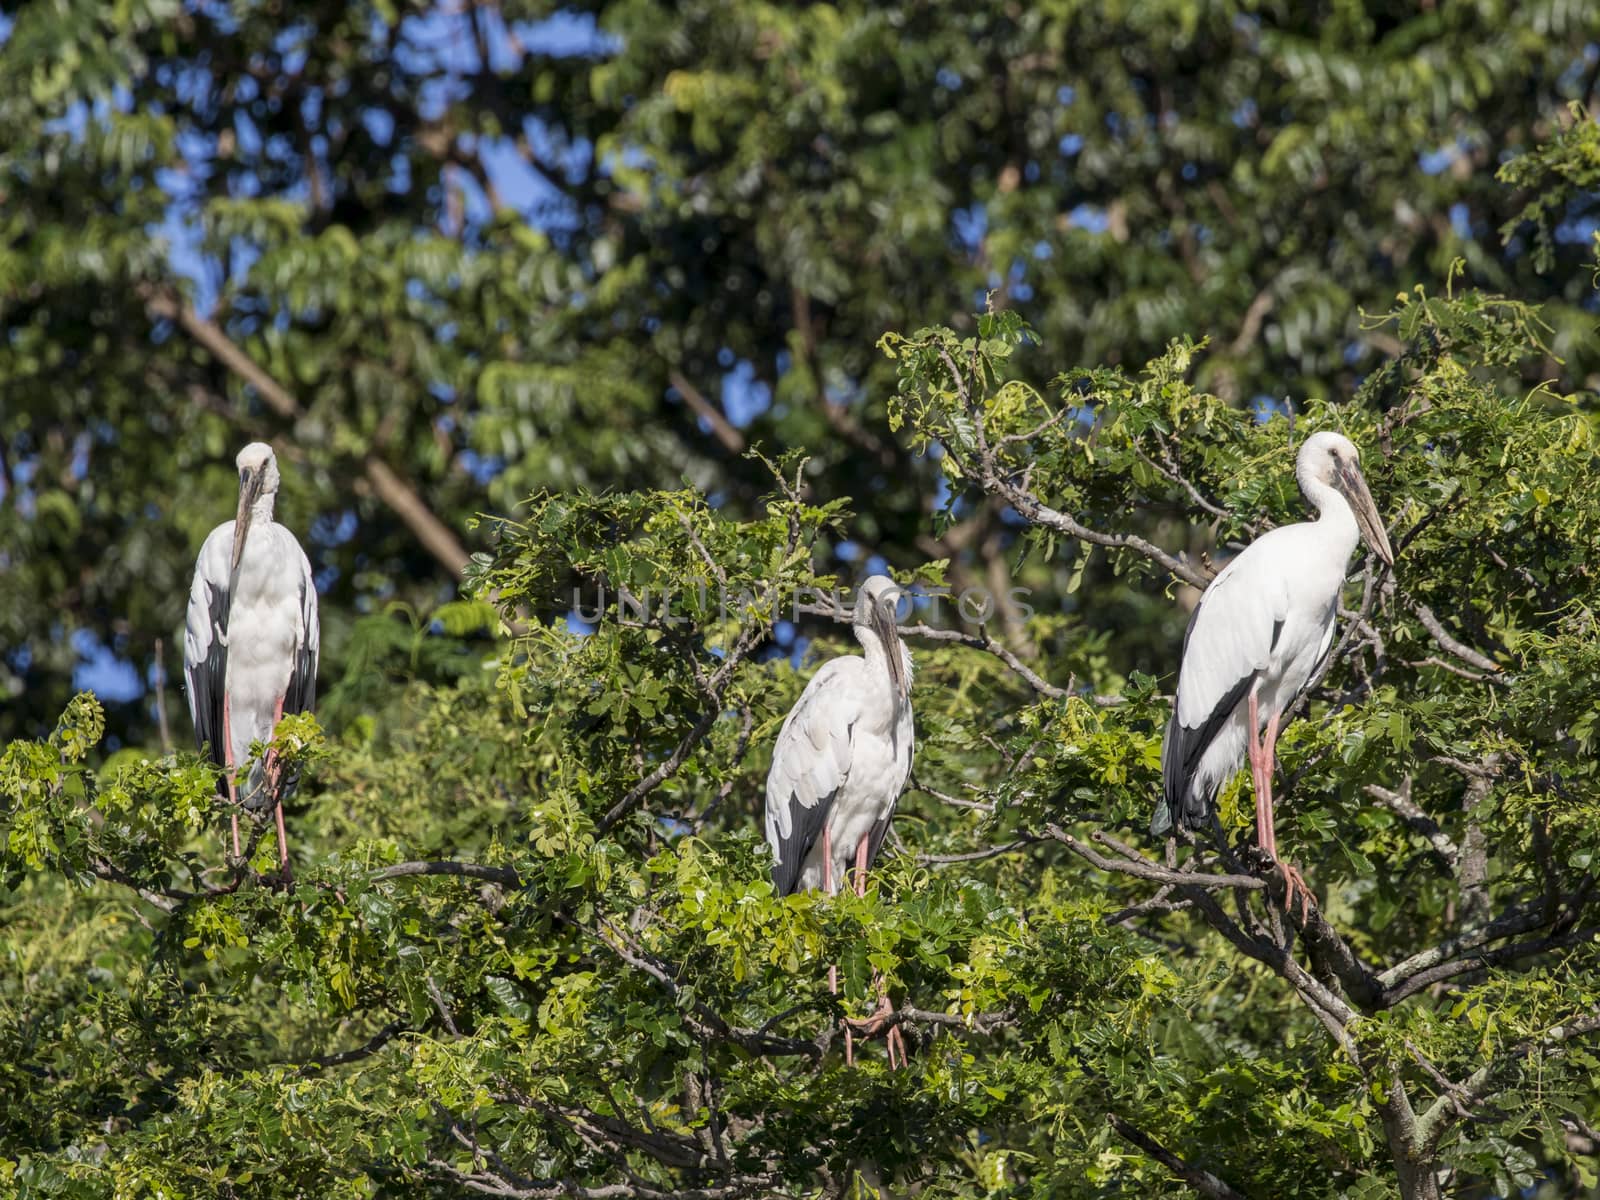 Image of stork perched on tree branch.